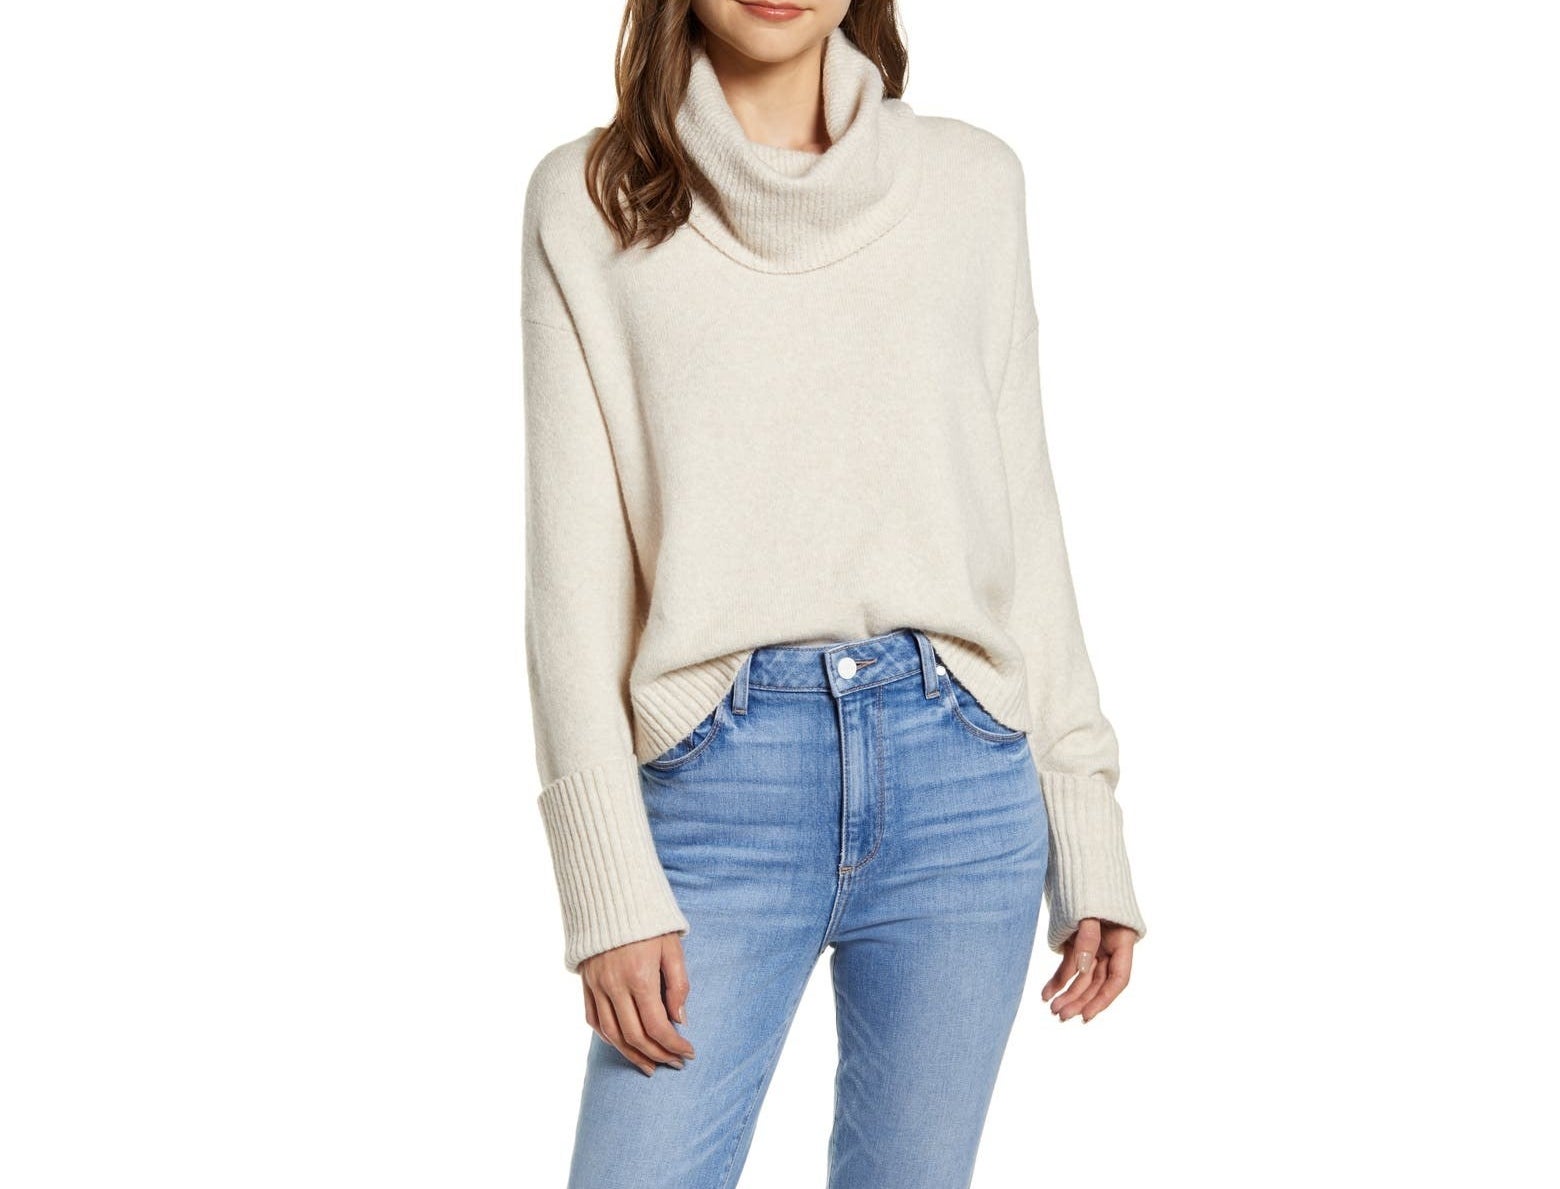 Model wearing the cream sweater tucked into jeans